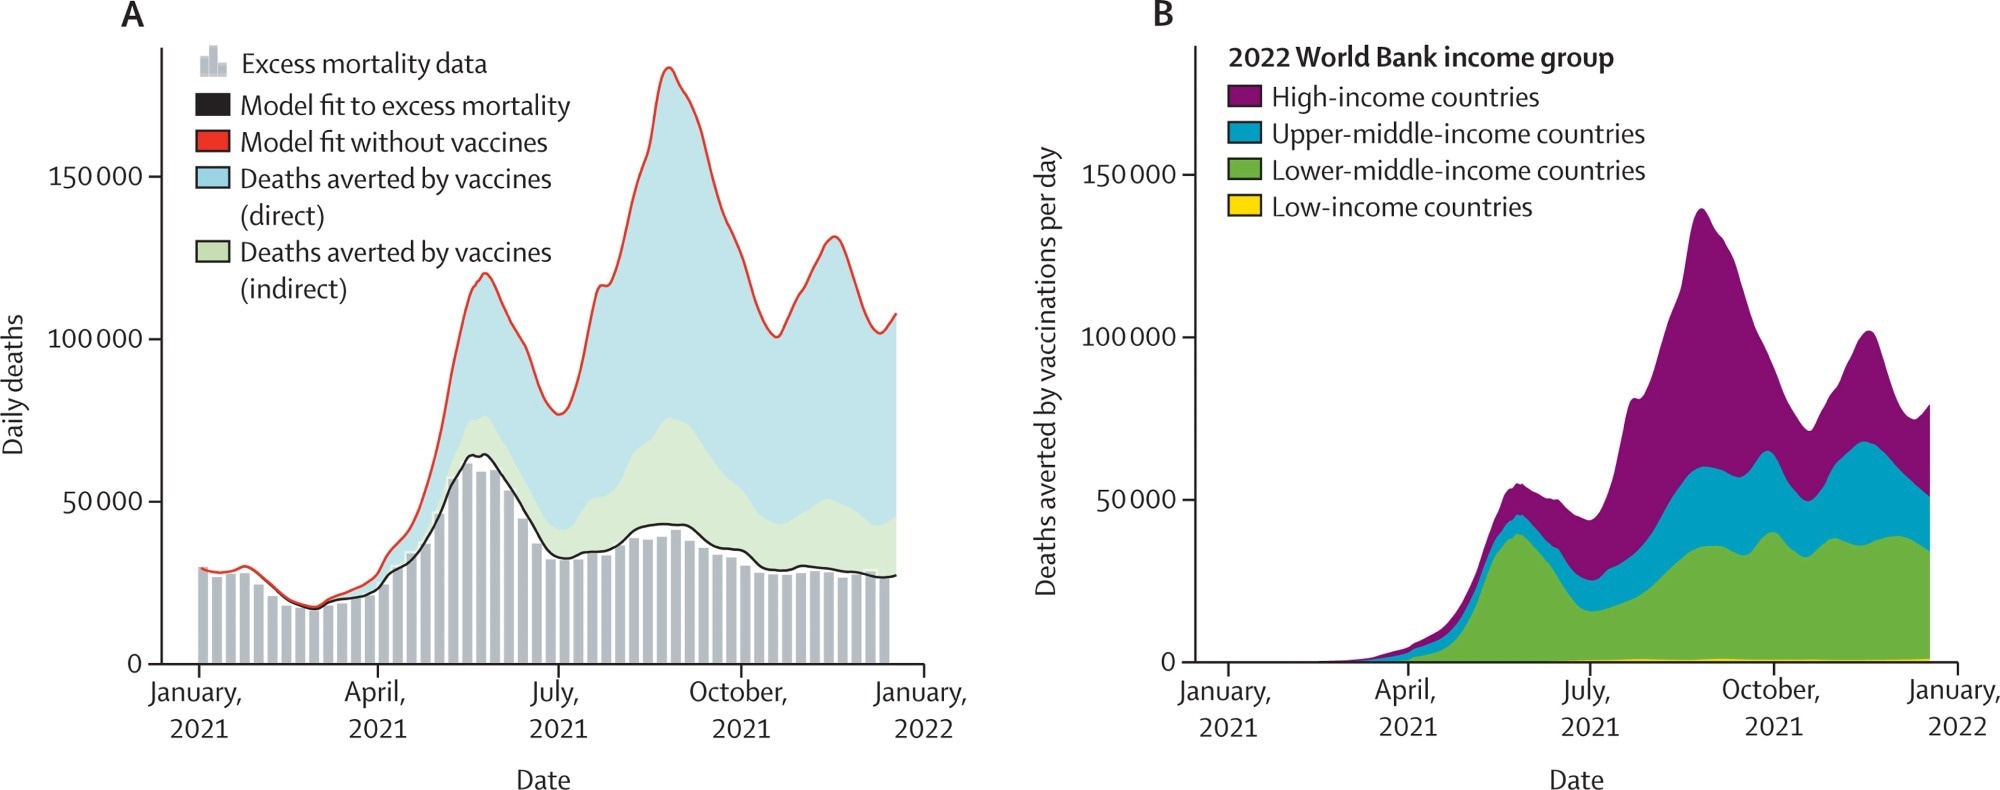 Global COVID-19 deaths avoided by vaccination based on excess mortality (A) Median number of daily COVID-19 deaths based on excess mortality estimates (grey vertical bars) in the first year of vaccination.  The baseline estimate of daily COVID-19 deaths from the model that fits excess mortality is plotted with the solid black line and the counterfactual scenario without vaccines is plotted with a red line.  The gap between the red and black lines indicates the number of deaths prevented due to vaccination, with the proportion of total deaths prevented by direct protection through vaccination shown in blue and indirect protection shown in green.  (B) Median number of daily deaths avoided per day according to the World Bank's income group in 2022.